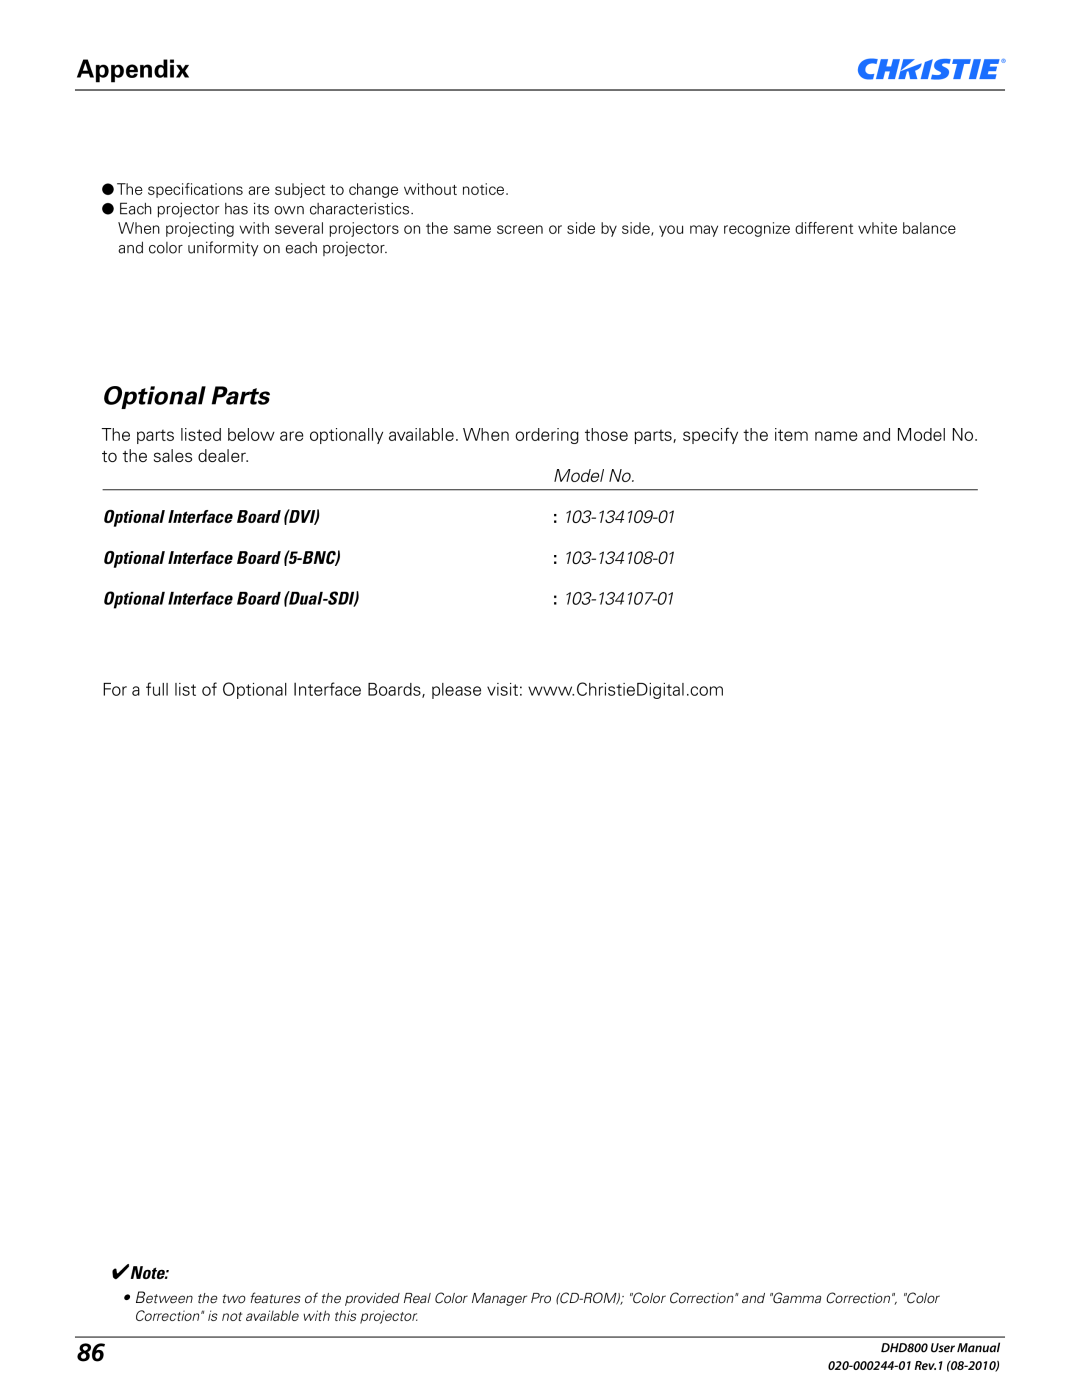 Christie Digital Systems DHD800 user manual Optional Parts, Appendix 